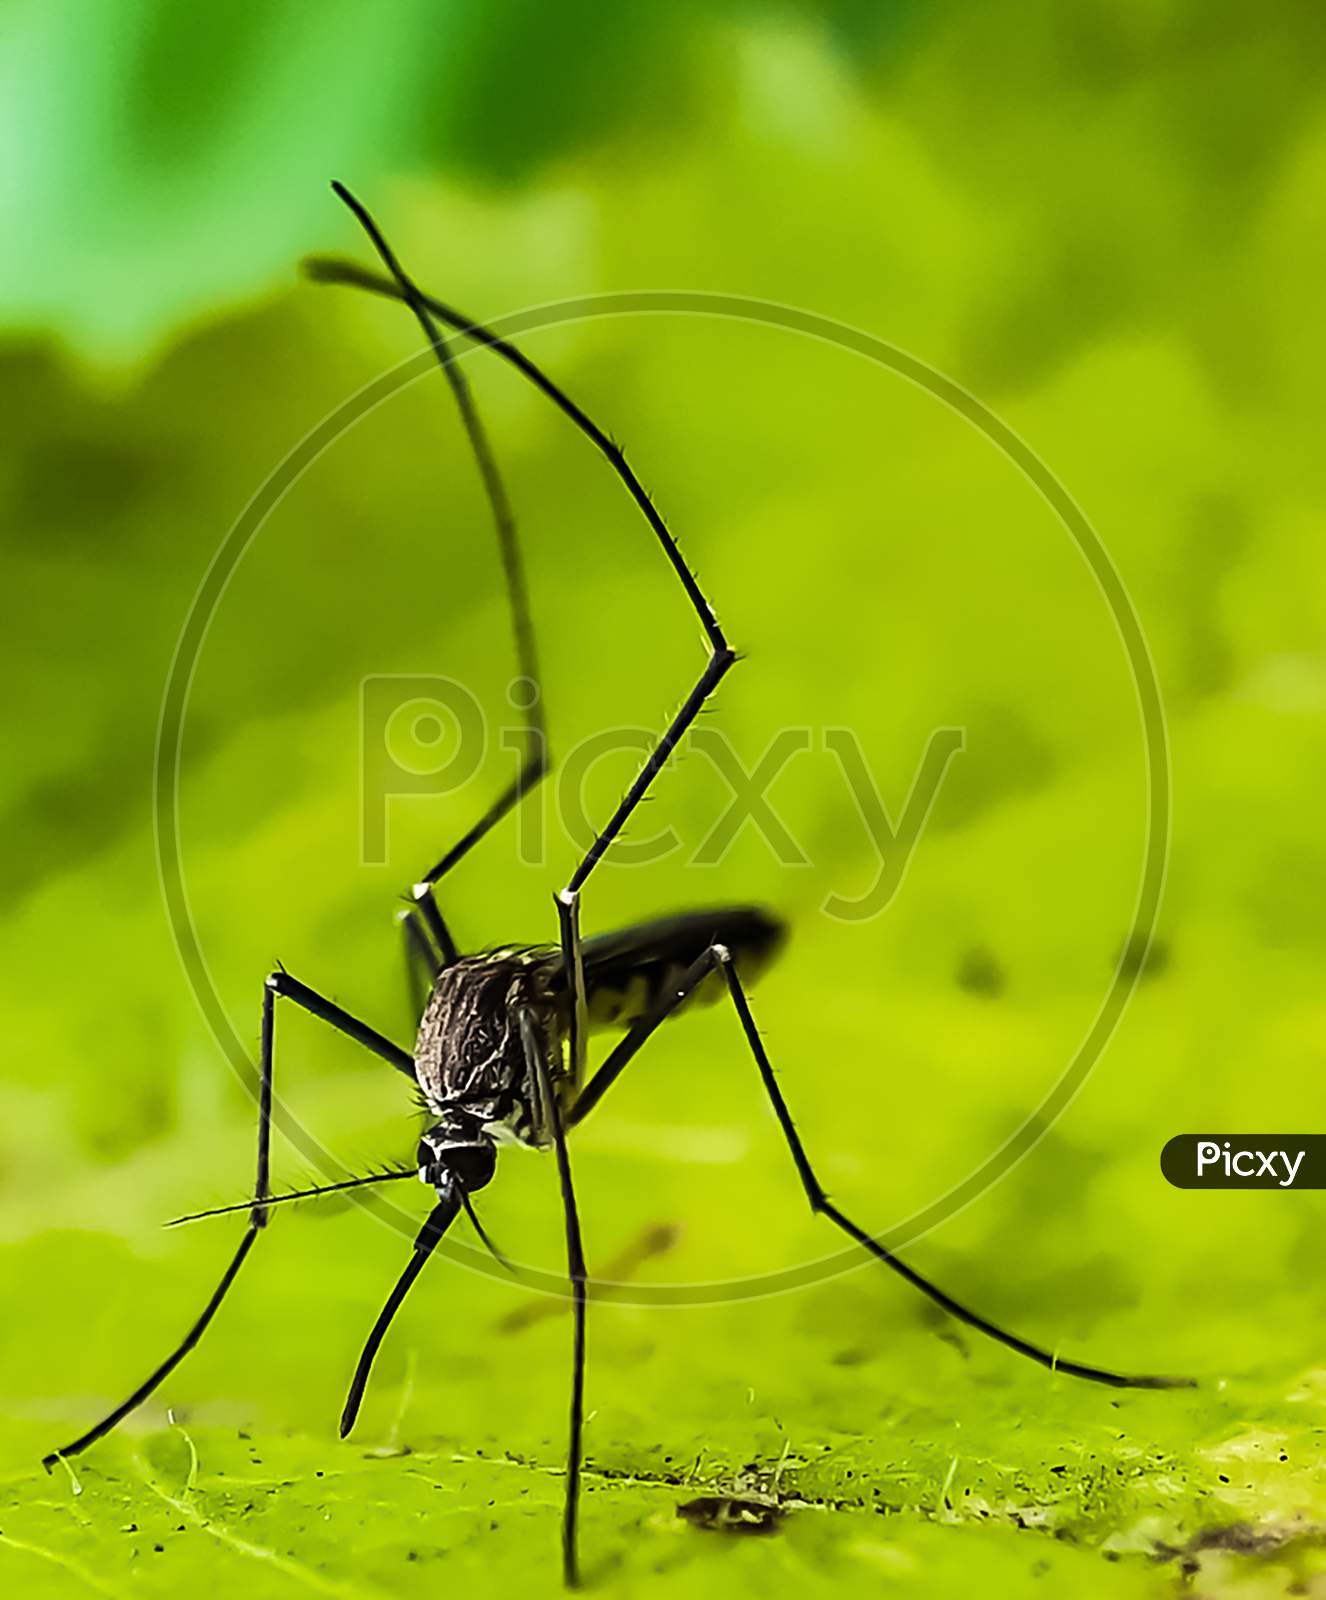 A Gray Color Mosquito Sitting On The Green Leaves In The Garden And Green Background.